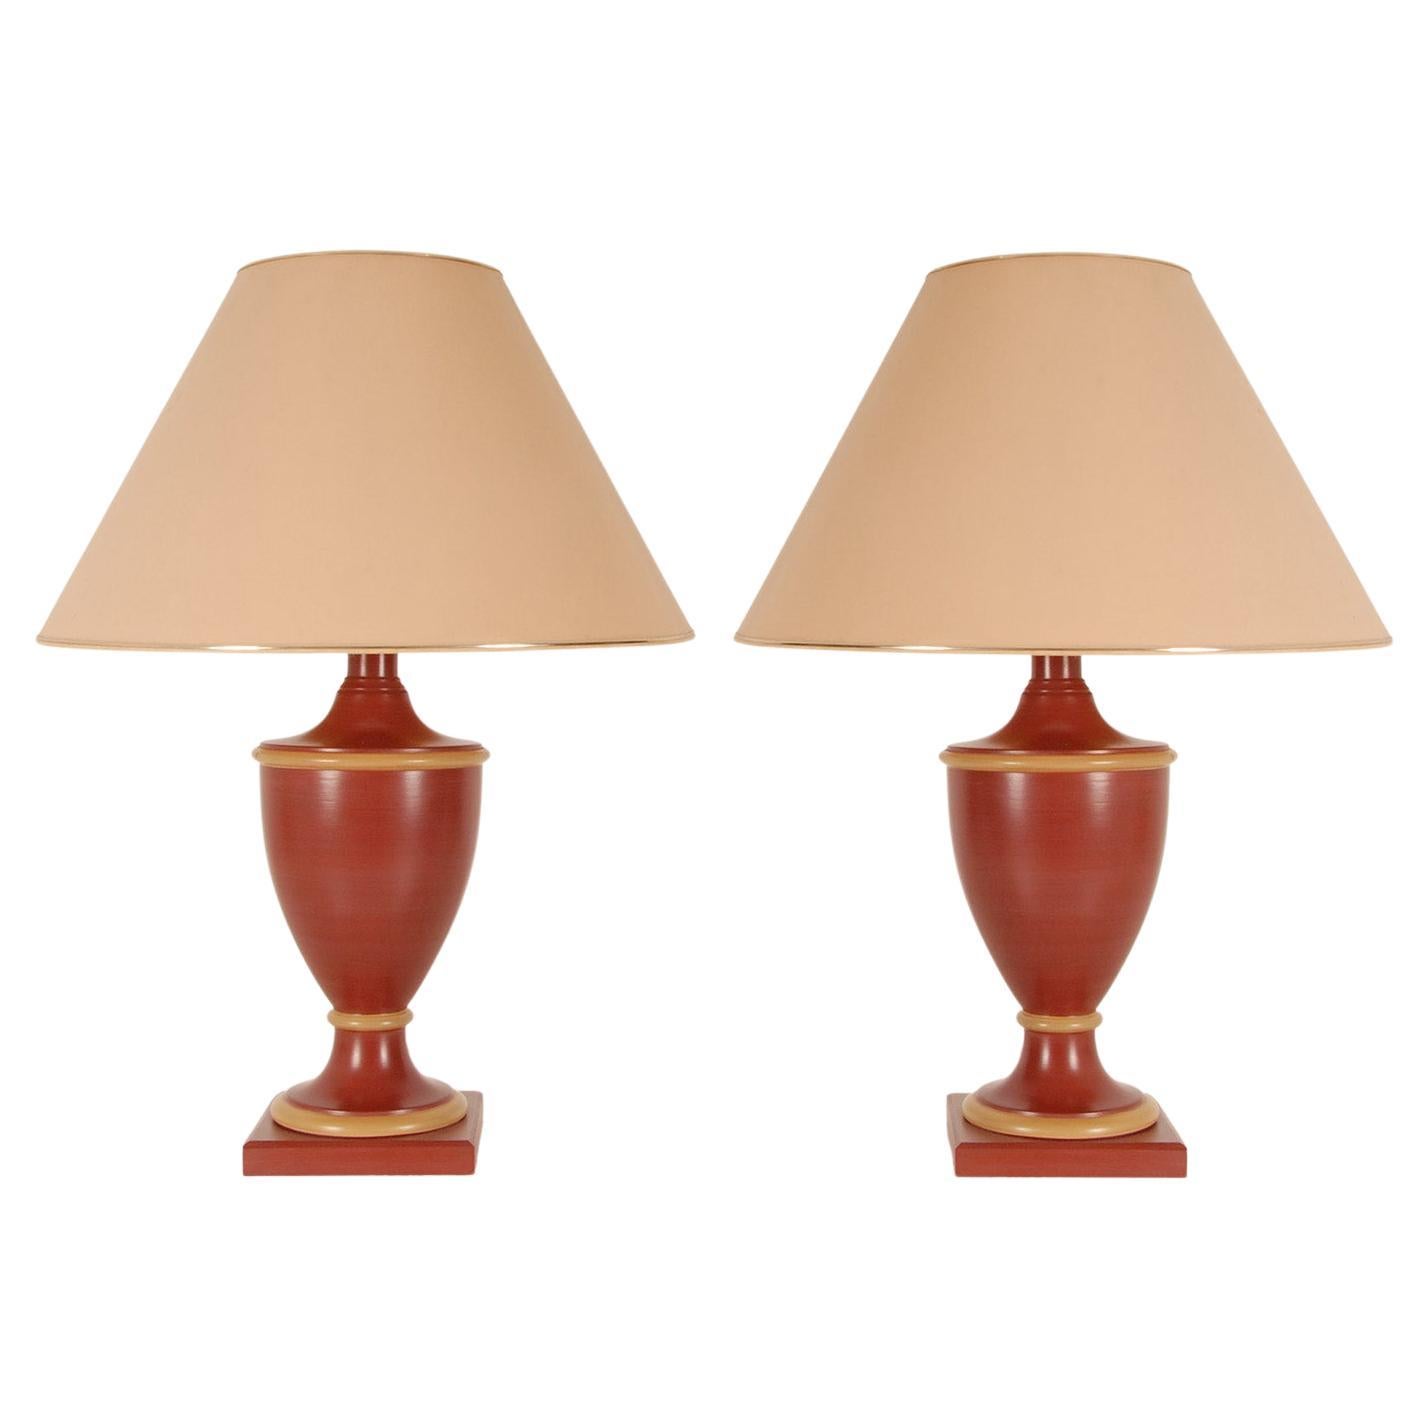 Vintage French Ceramic Burgundy Red Table Lamps Buffet Vase Lamps, a Pair